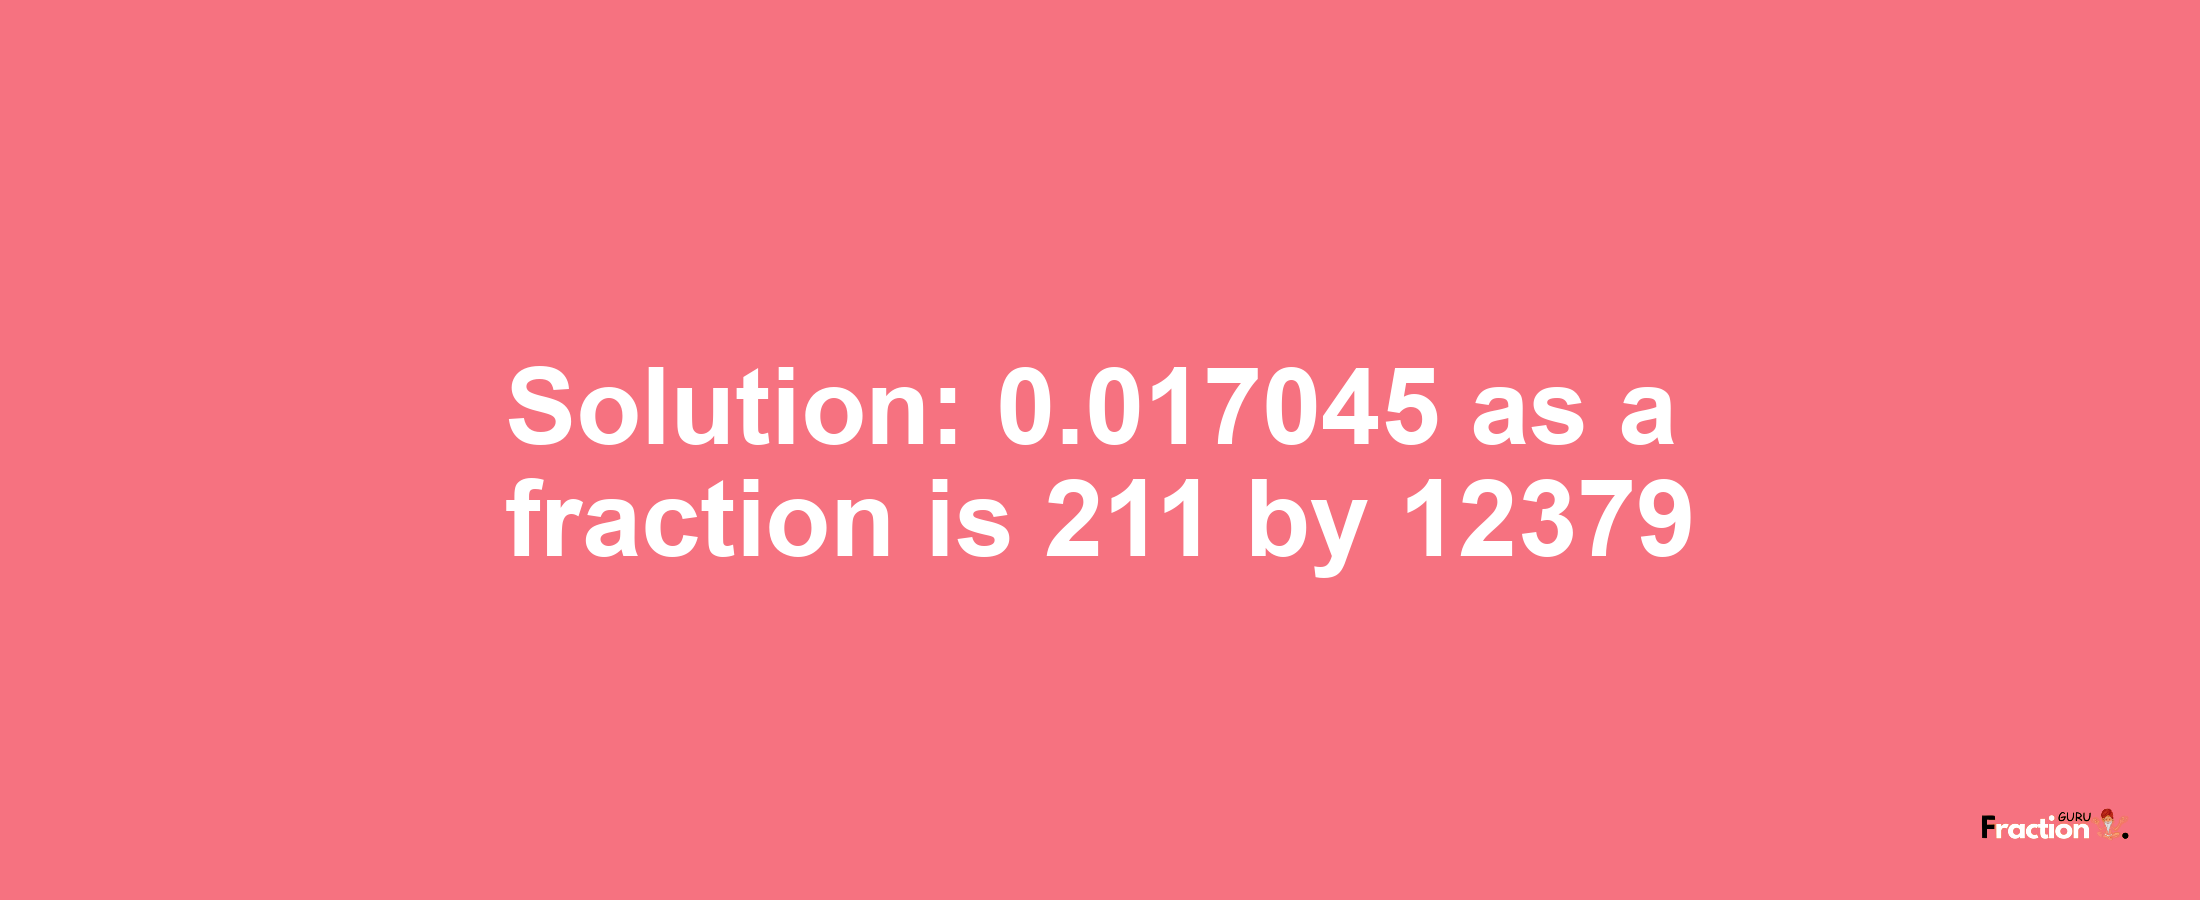 Solution:0.017045 as a fraction is 211/12379